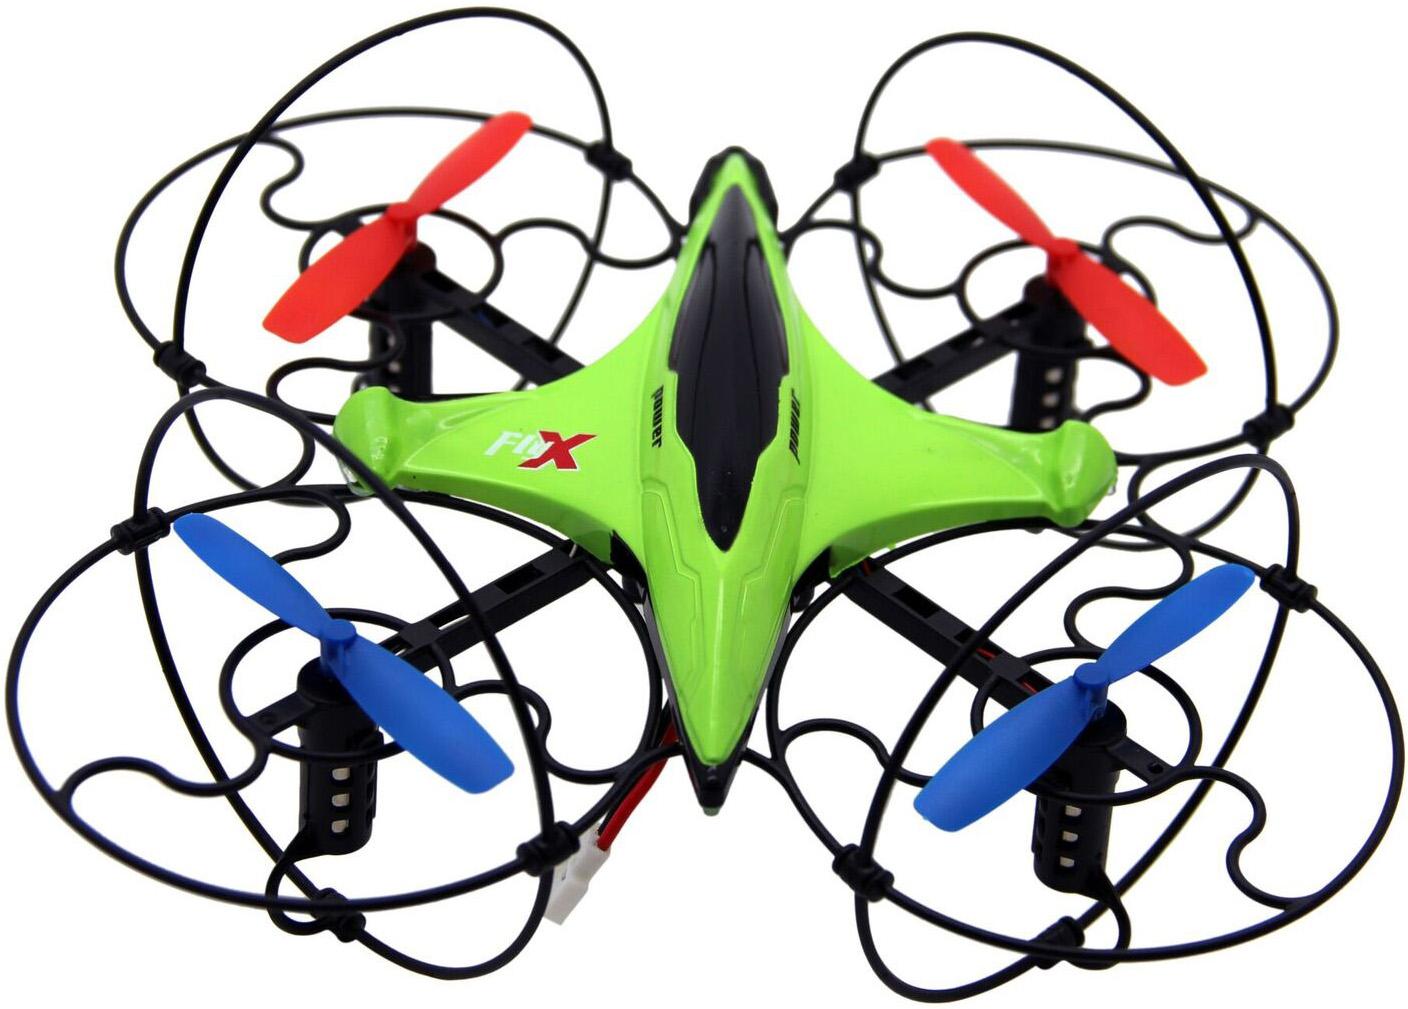 Halford's Flying Gadgets X-Voice - Voice Controlled Drone